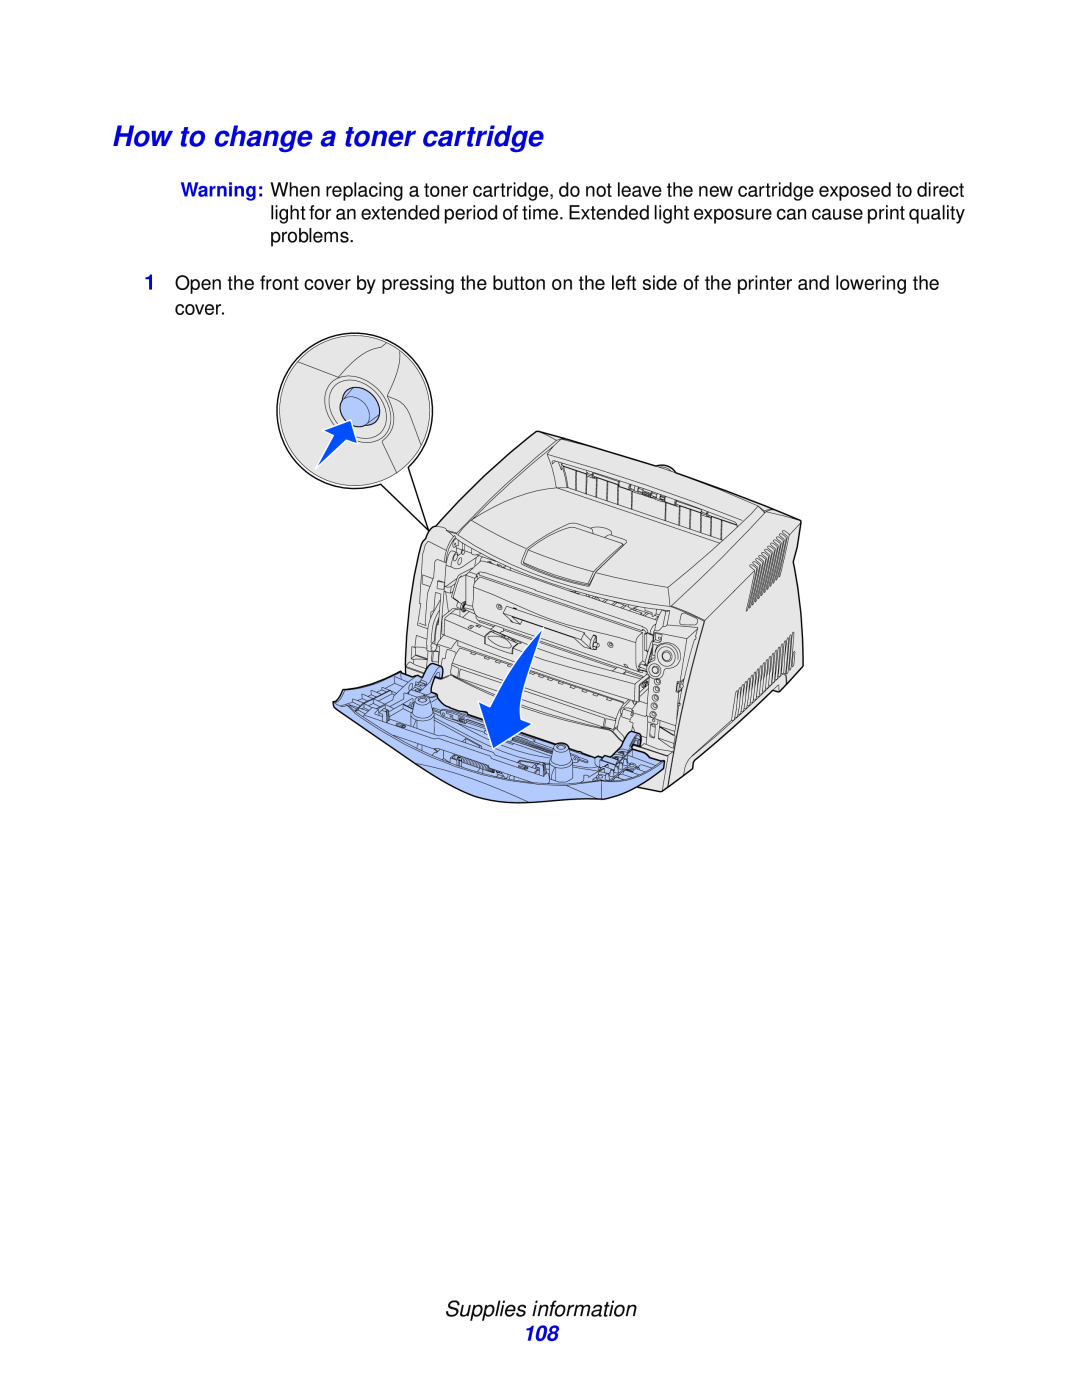 Lexmark 232, E332n, 230 manual How to change a toner cartridge, Supplies information 